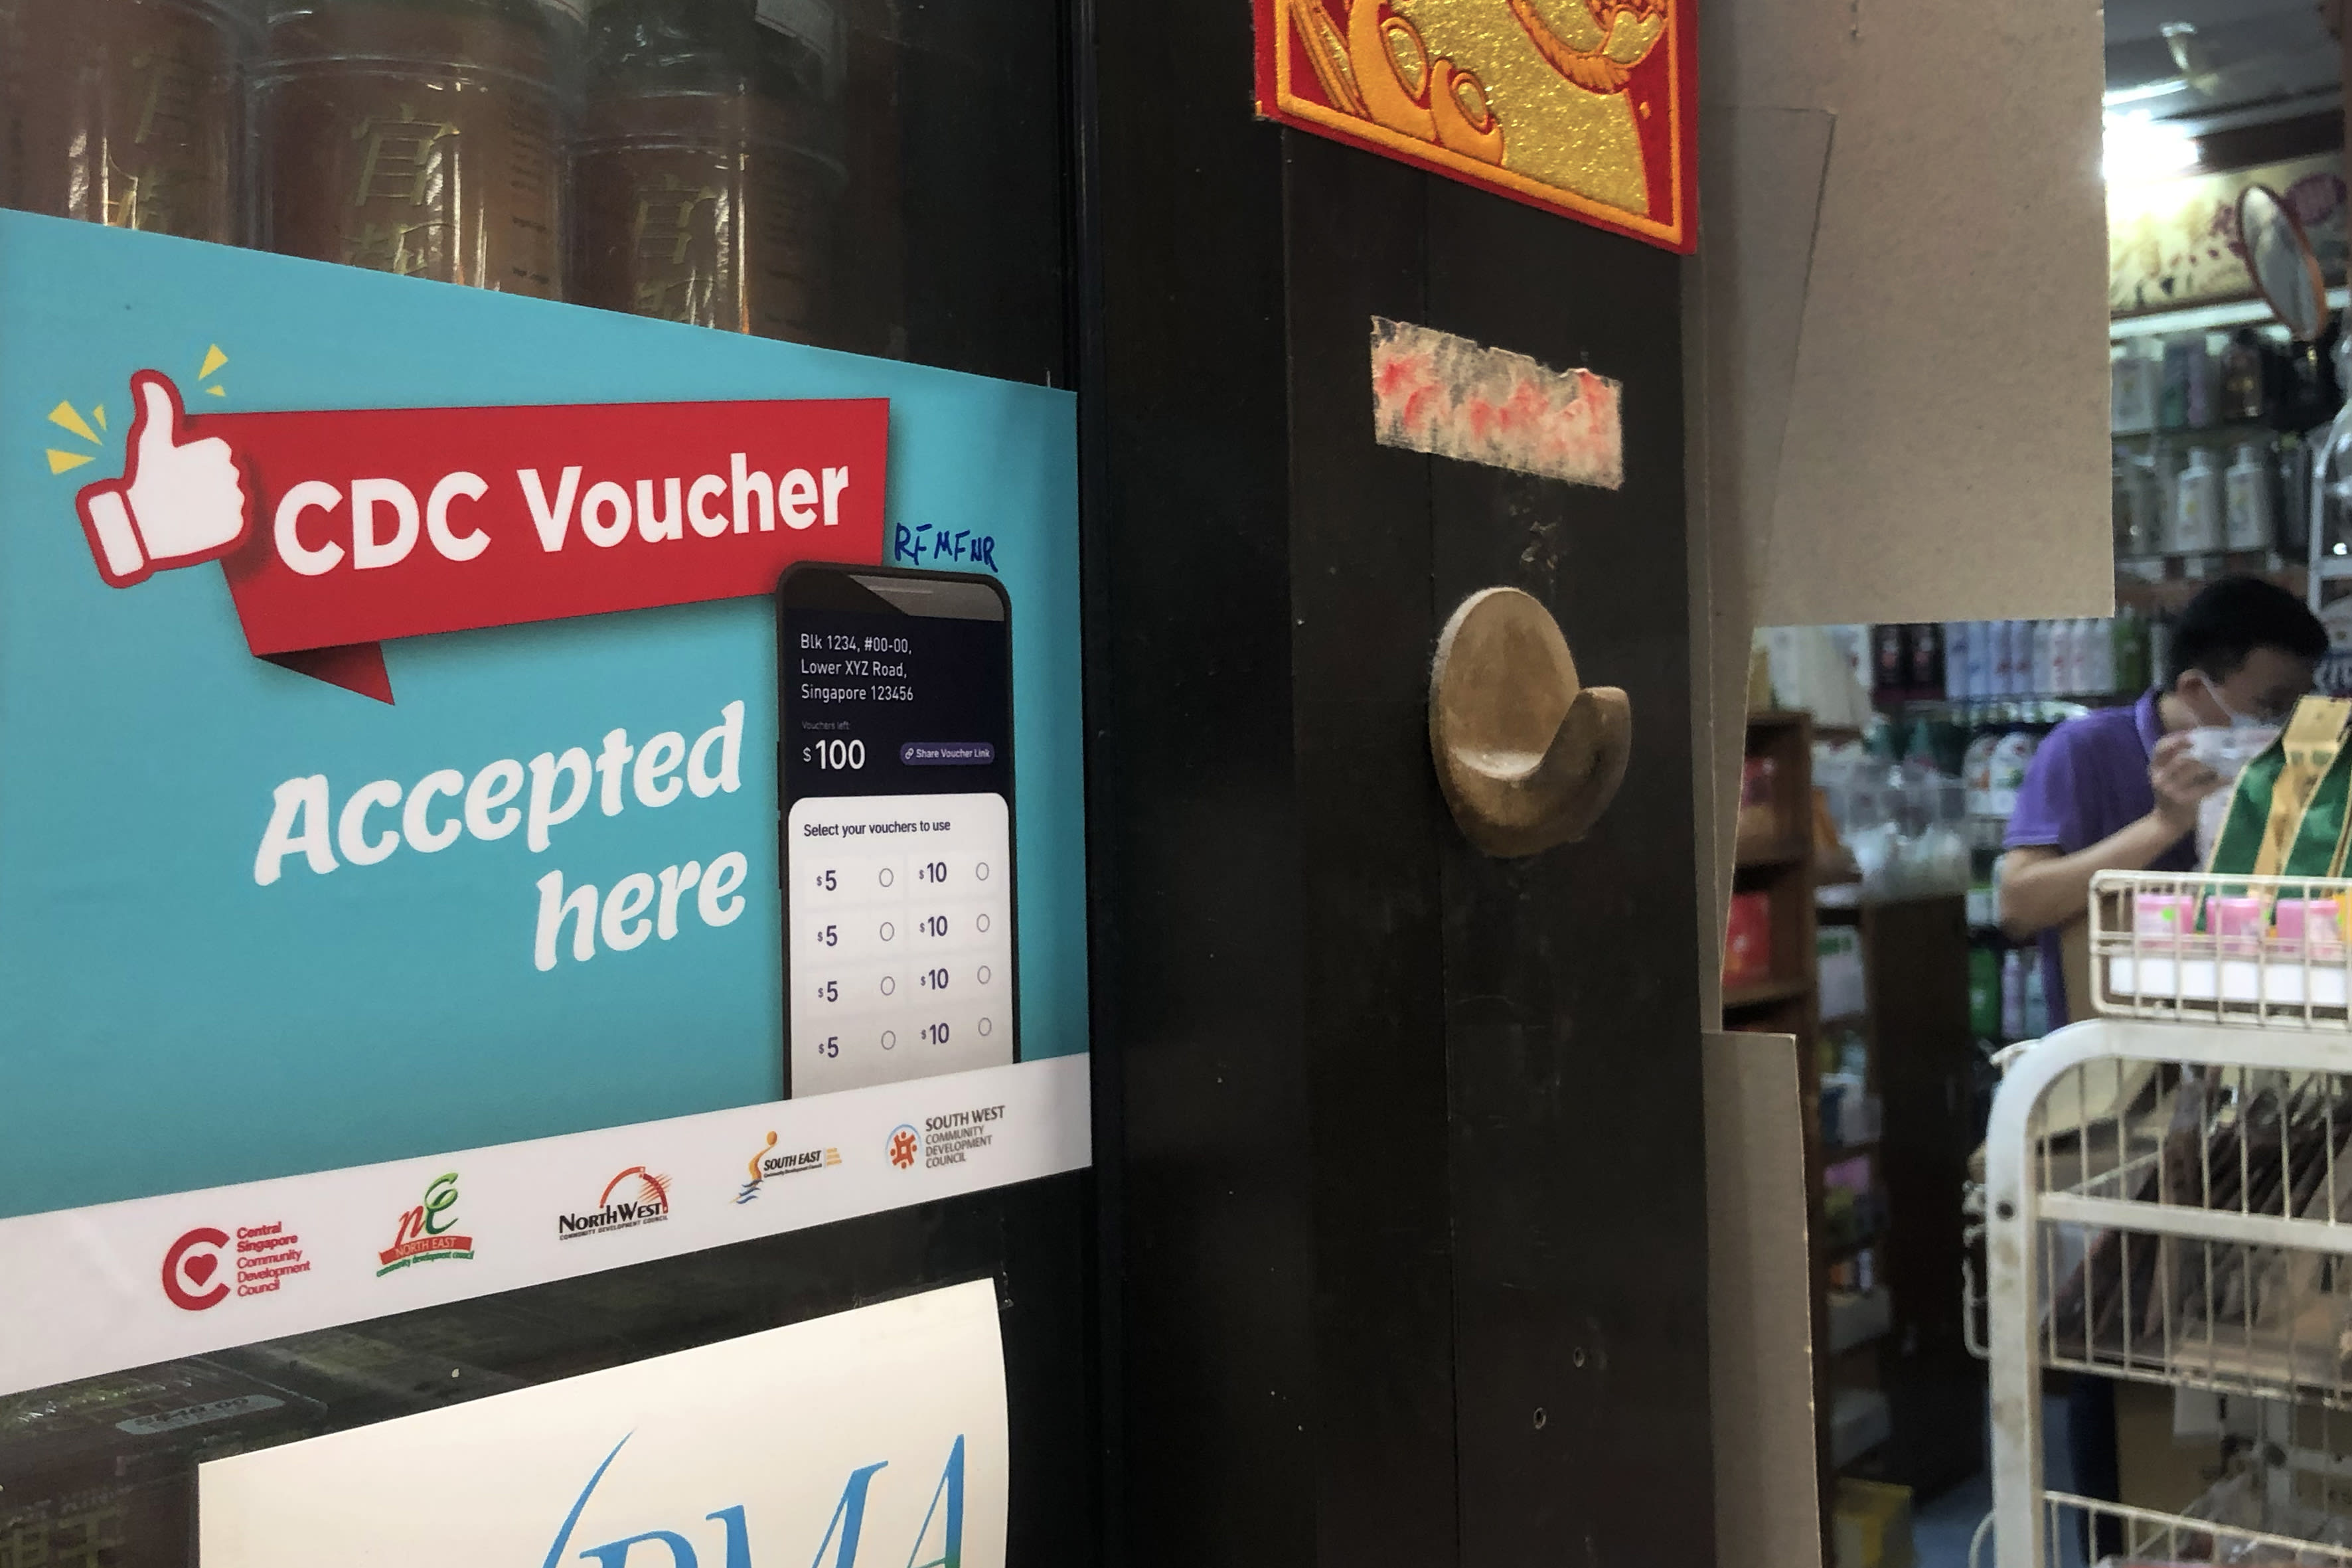 New website lists participating hawkers, merchants where households can redeem CDC vouchers